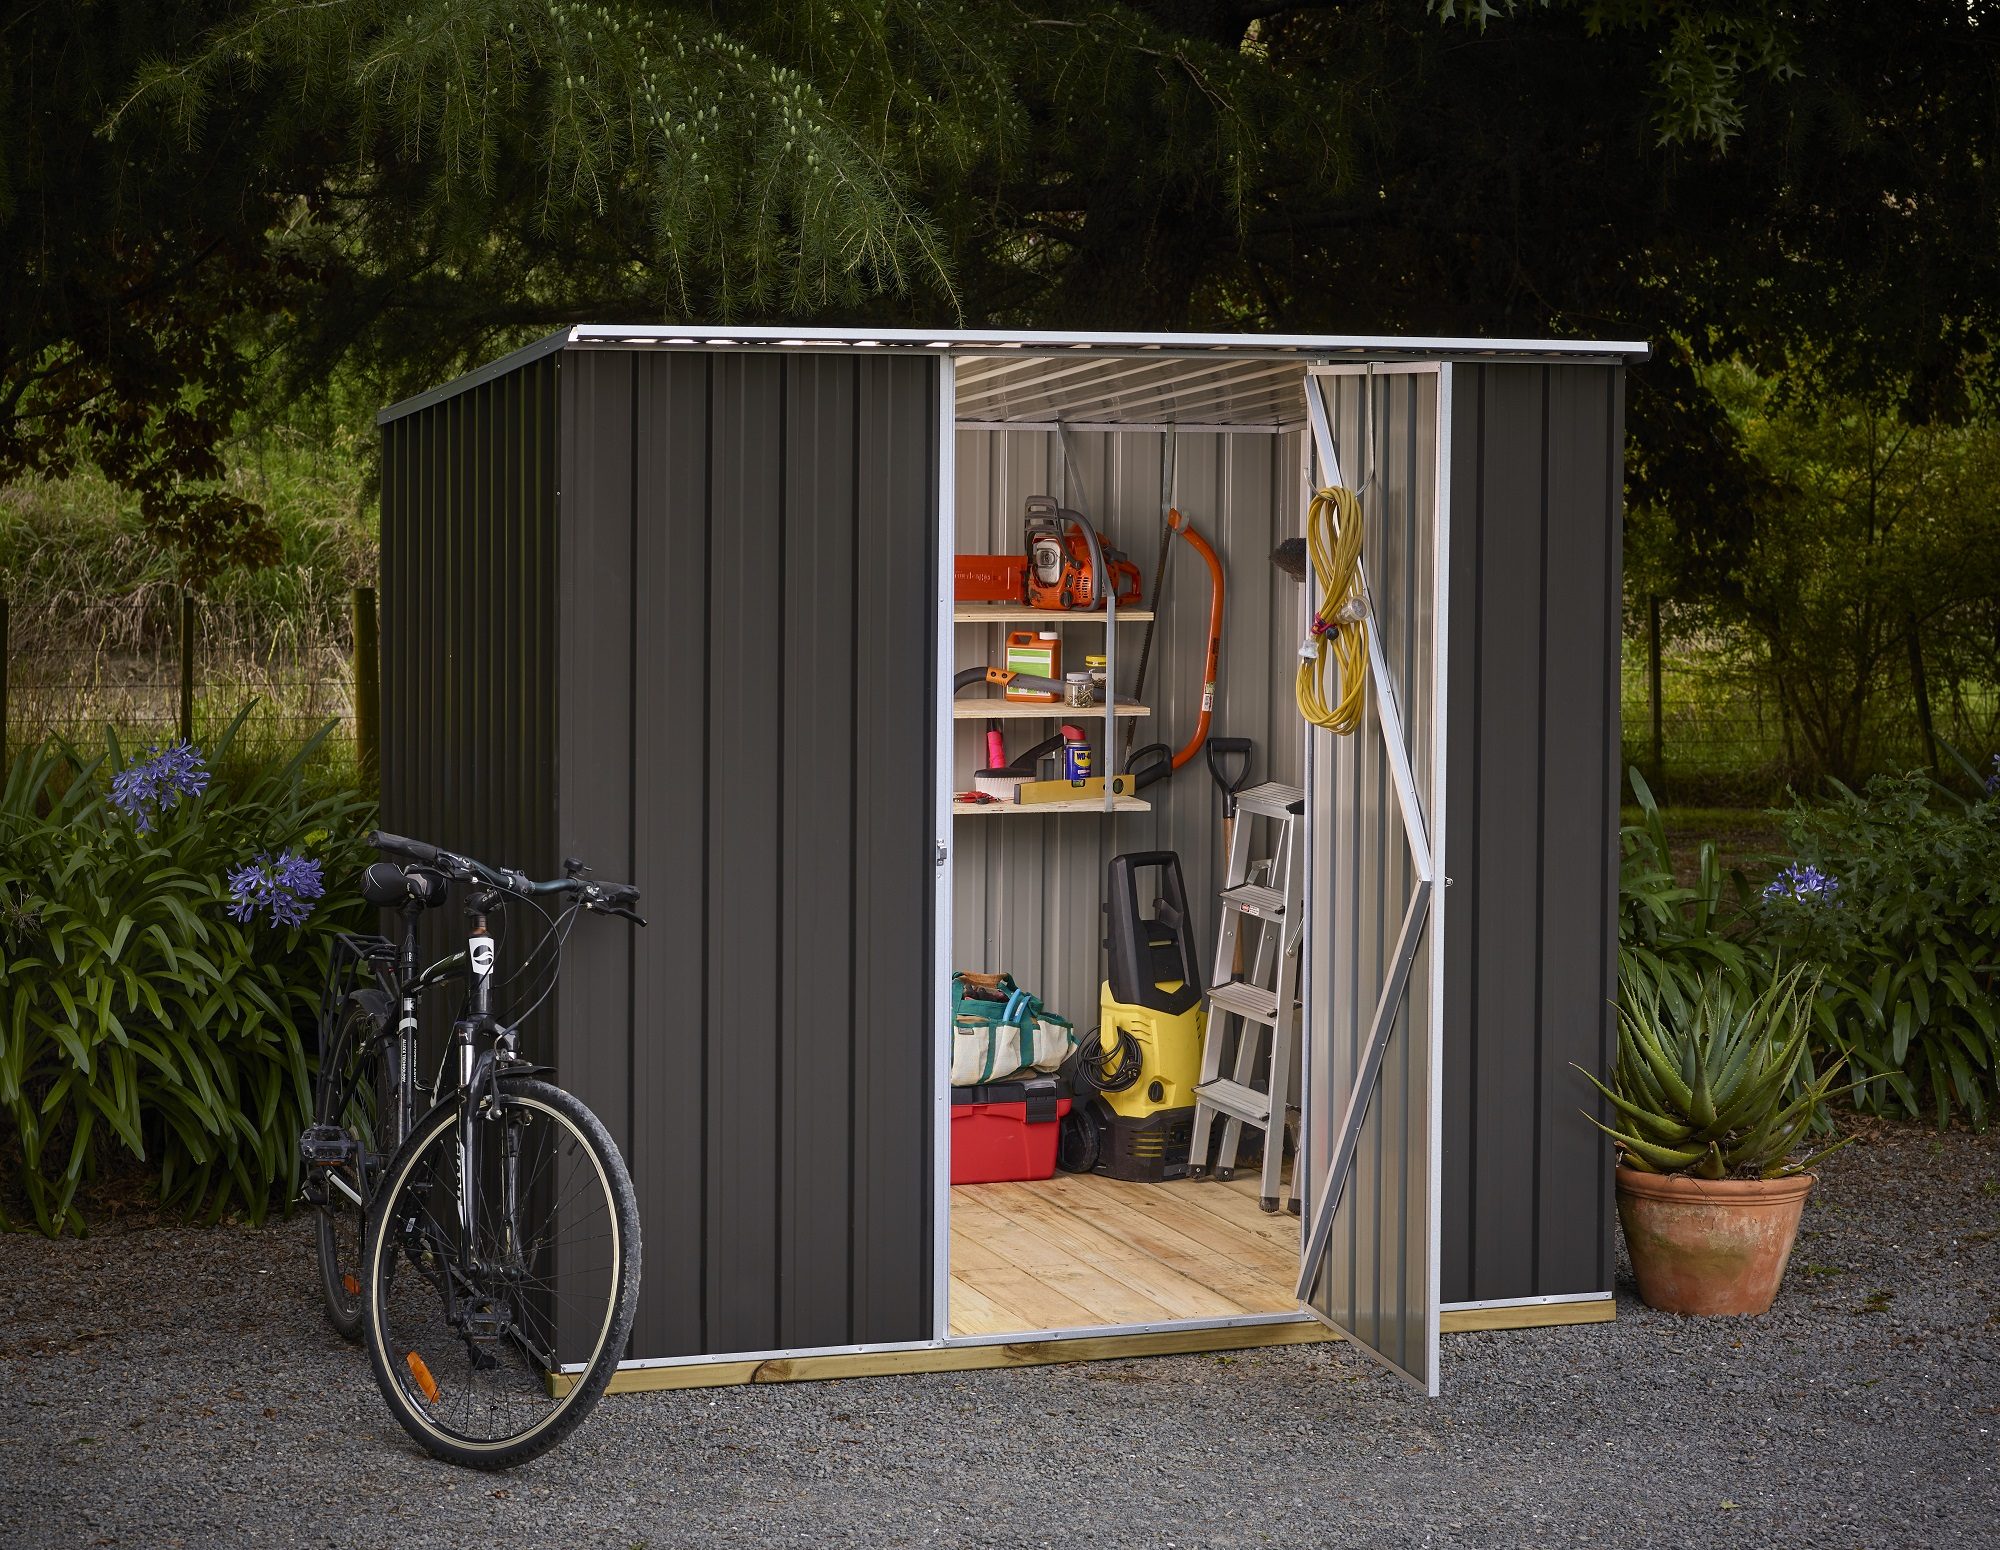 Galvo Cost Effective Shed E1563932666192 